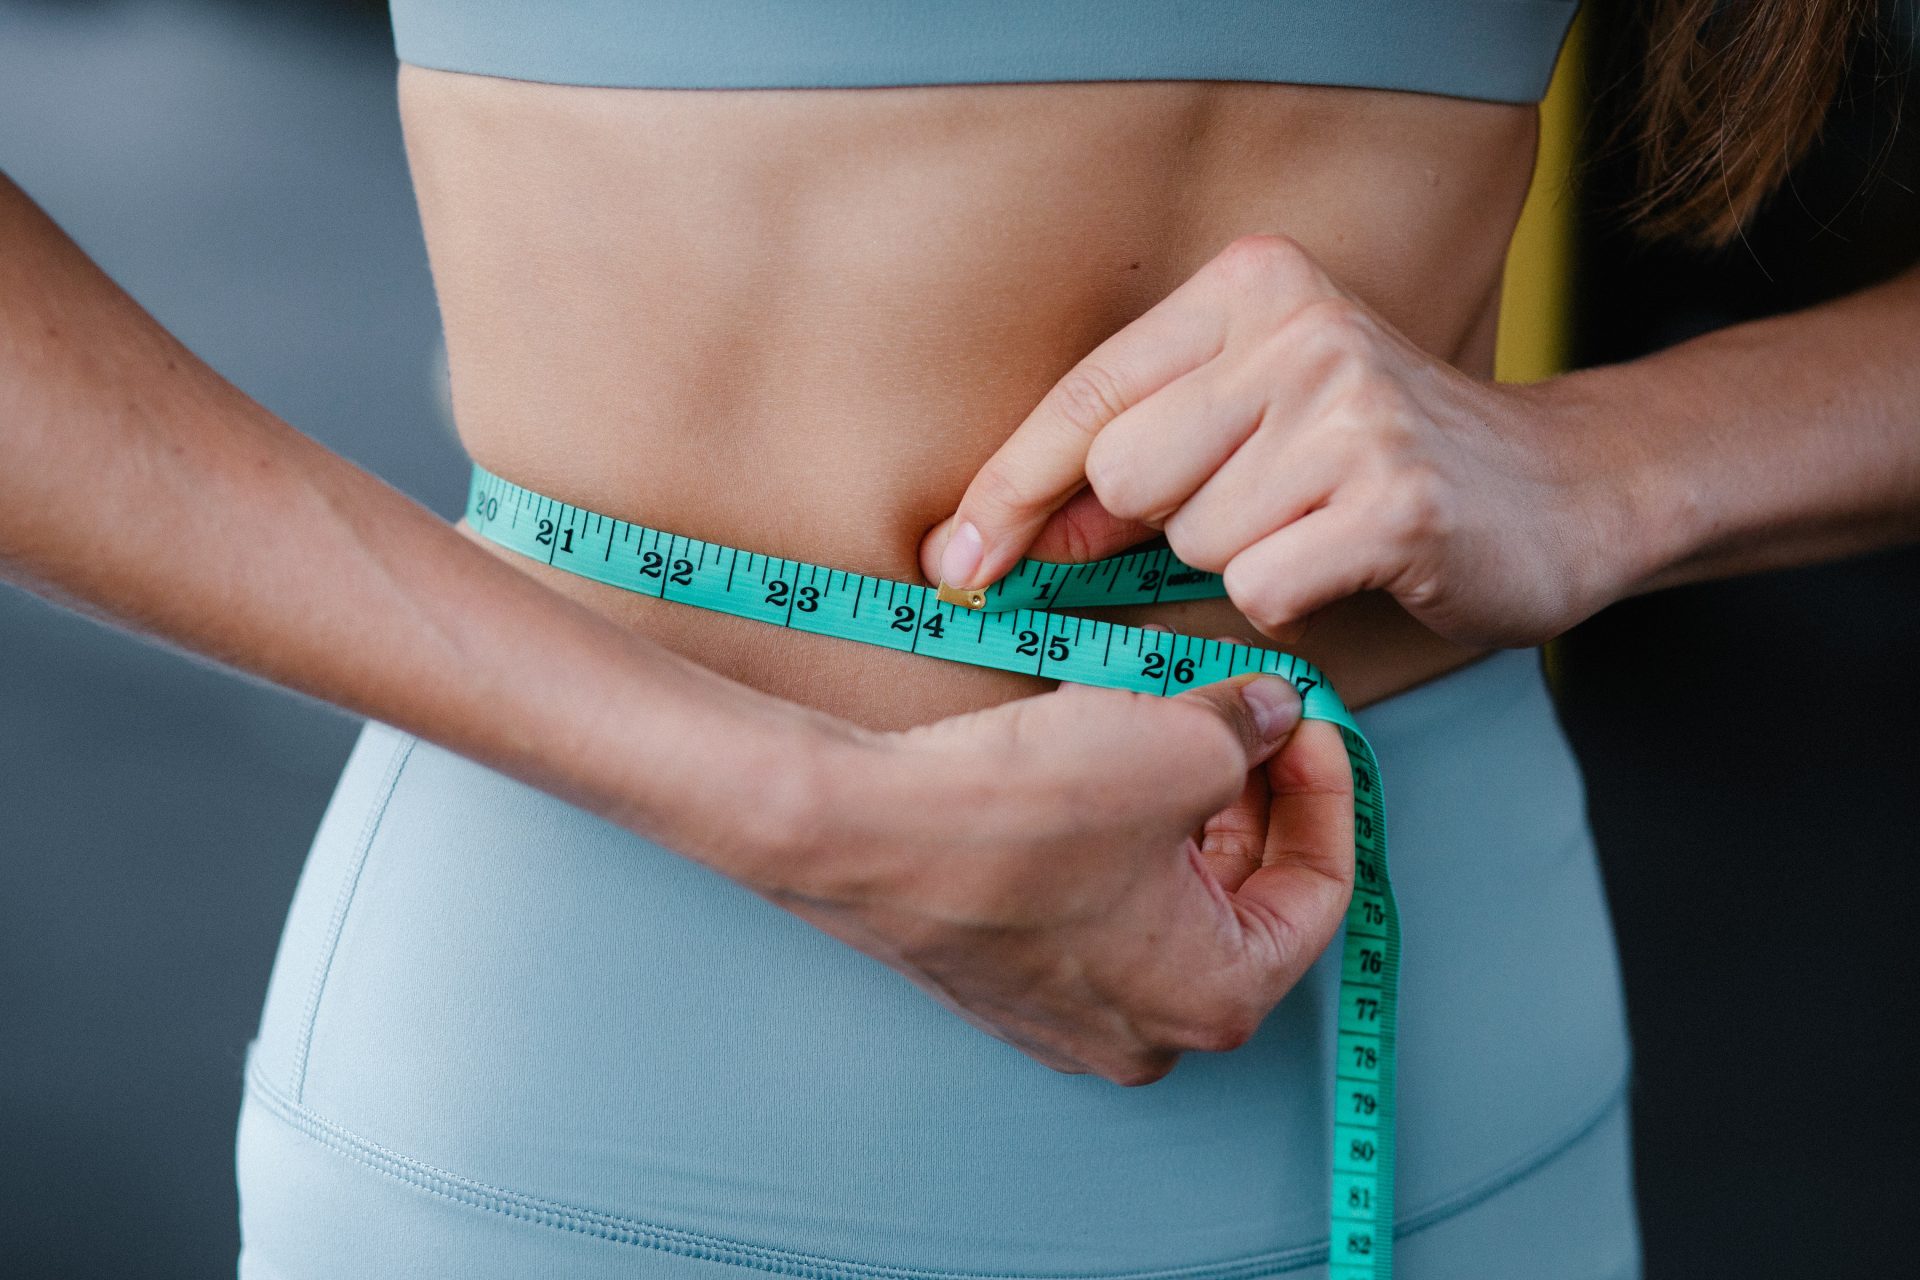 Surgeries that can help lose your weight